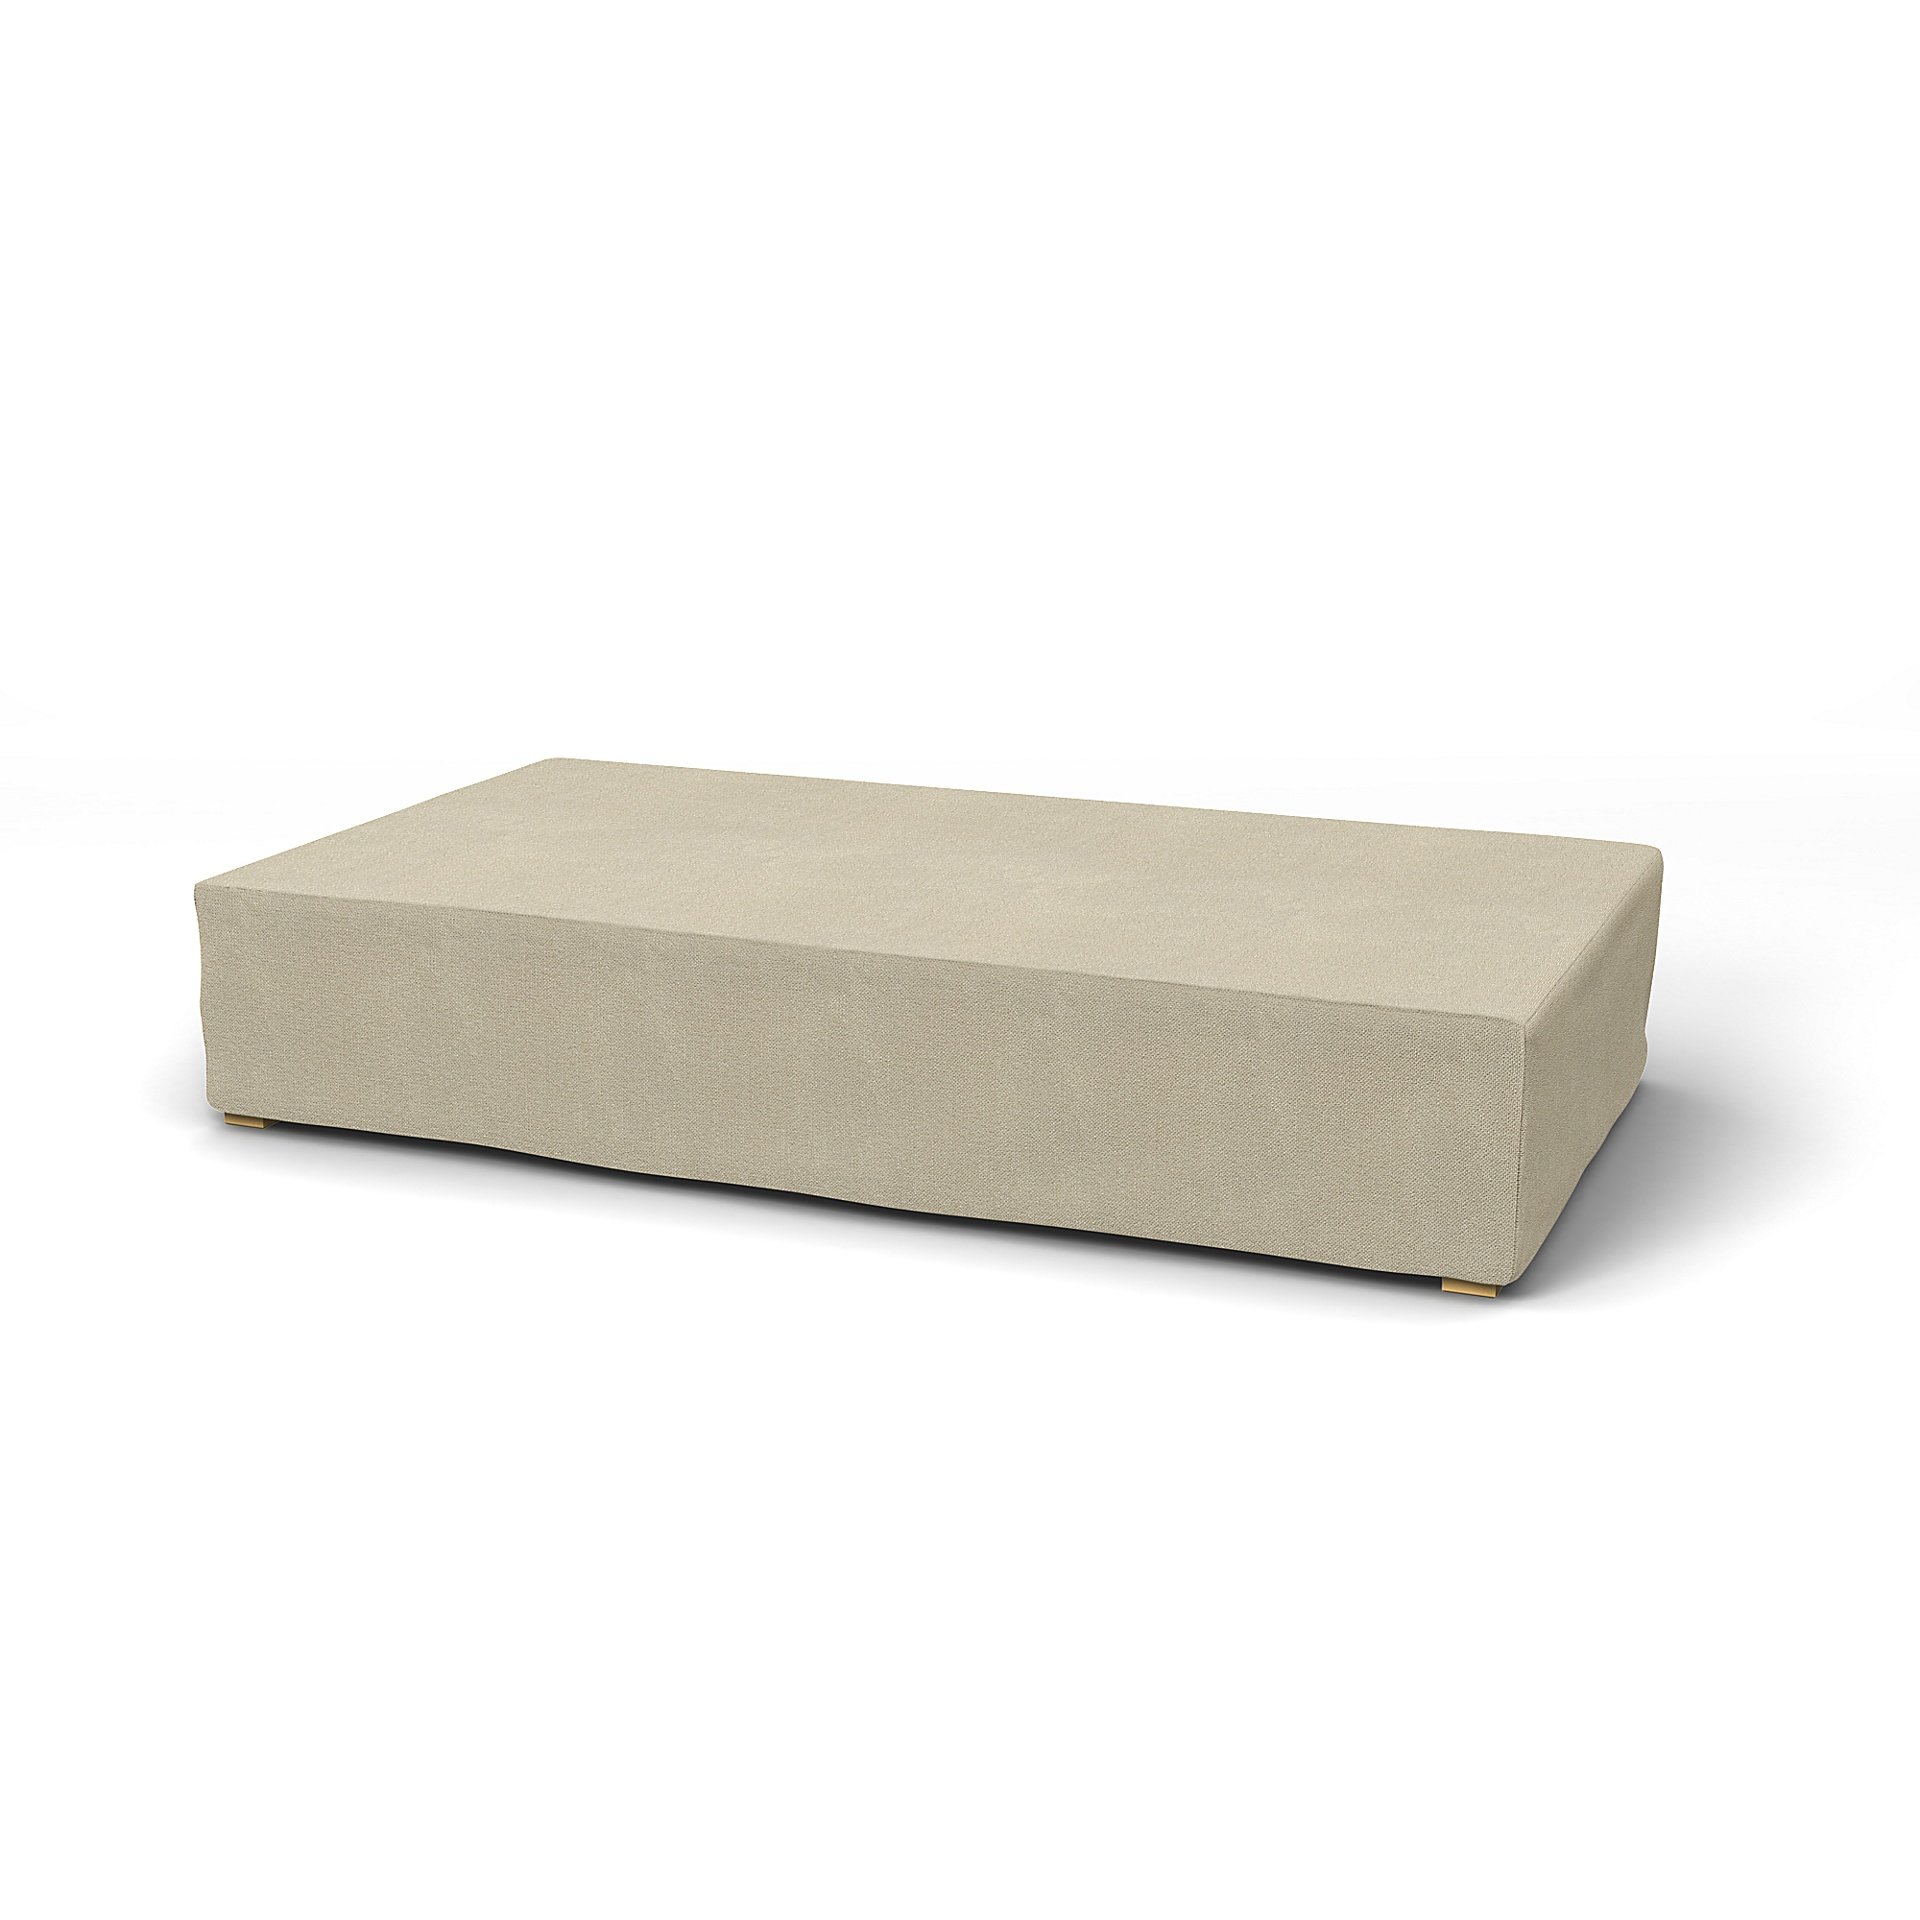 Daybed Cover, Cream, Wool-look - Bemz